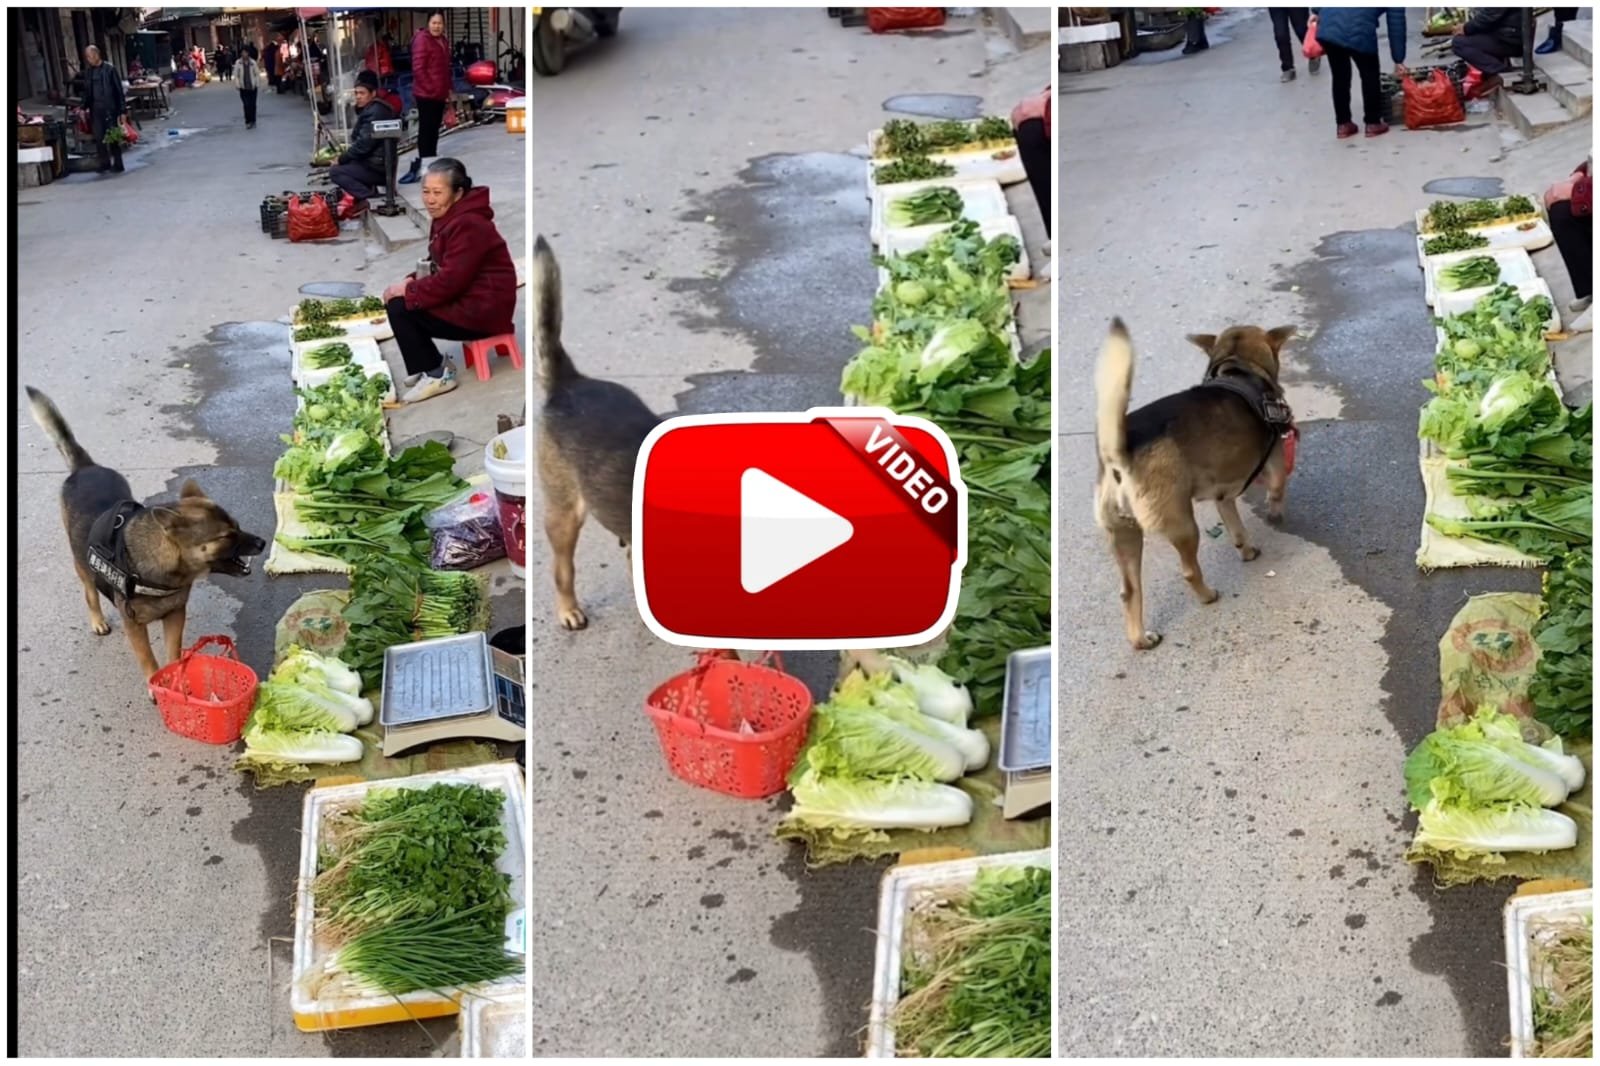 Doggy Ka Video - Doggy went out to buy vegetables in the market with a basket.